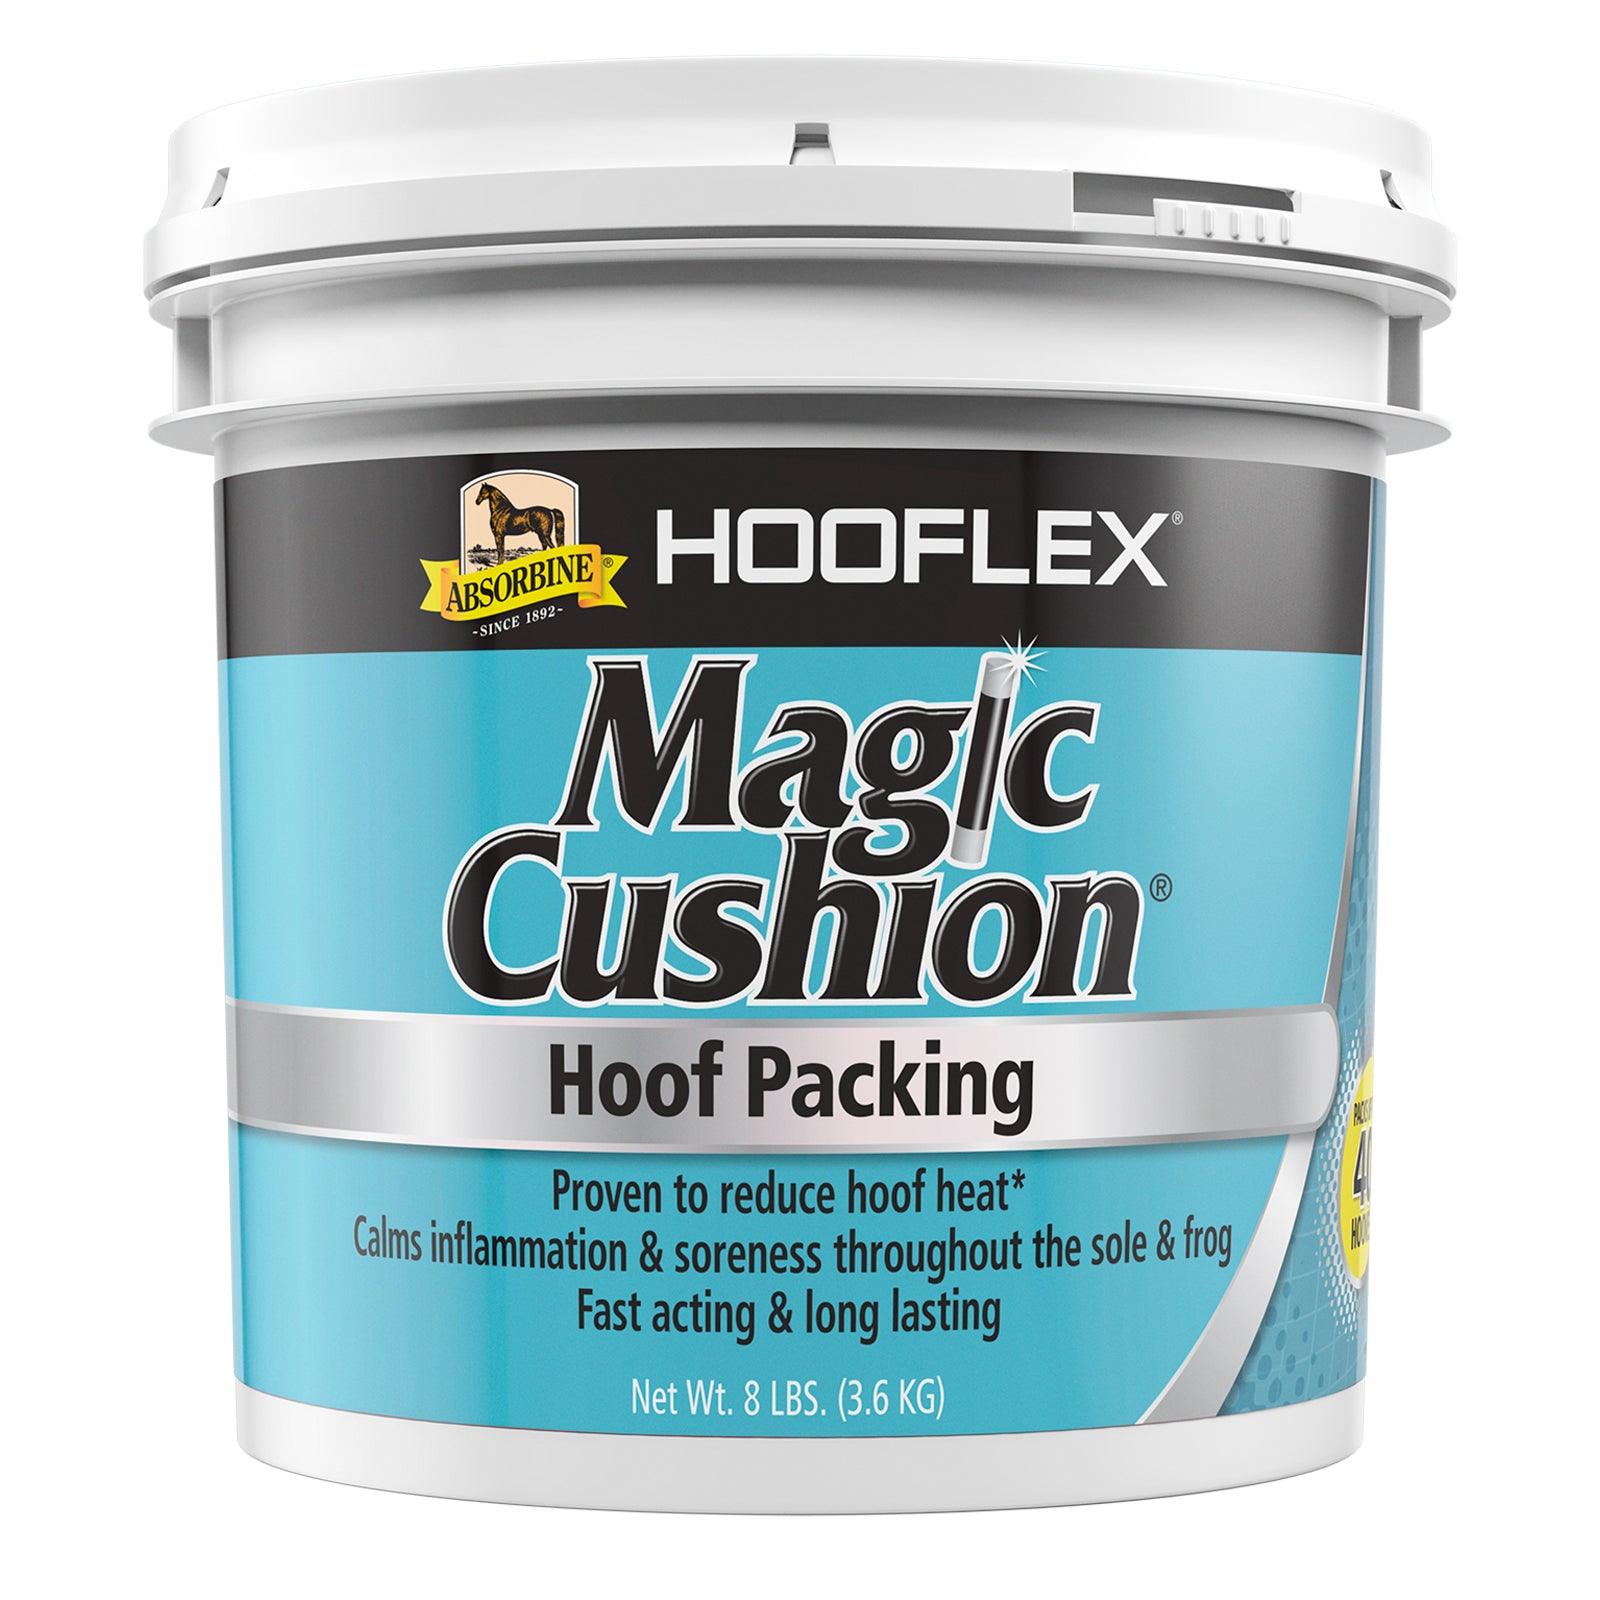 Magic Cushion Hoof Packing. Proven to reduce hoof heat. Calms inflammation & soreness throughout the sole & frog. Fast acting, long lasting. Net weight 8 pound bucket.